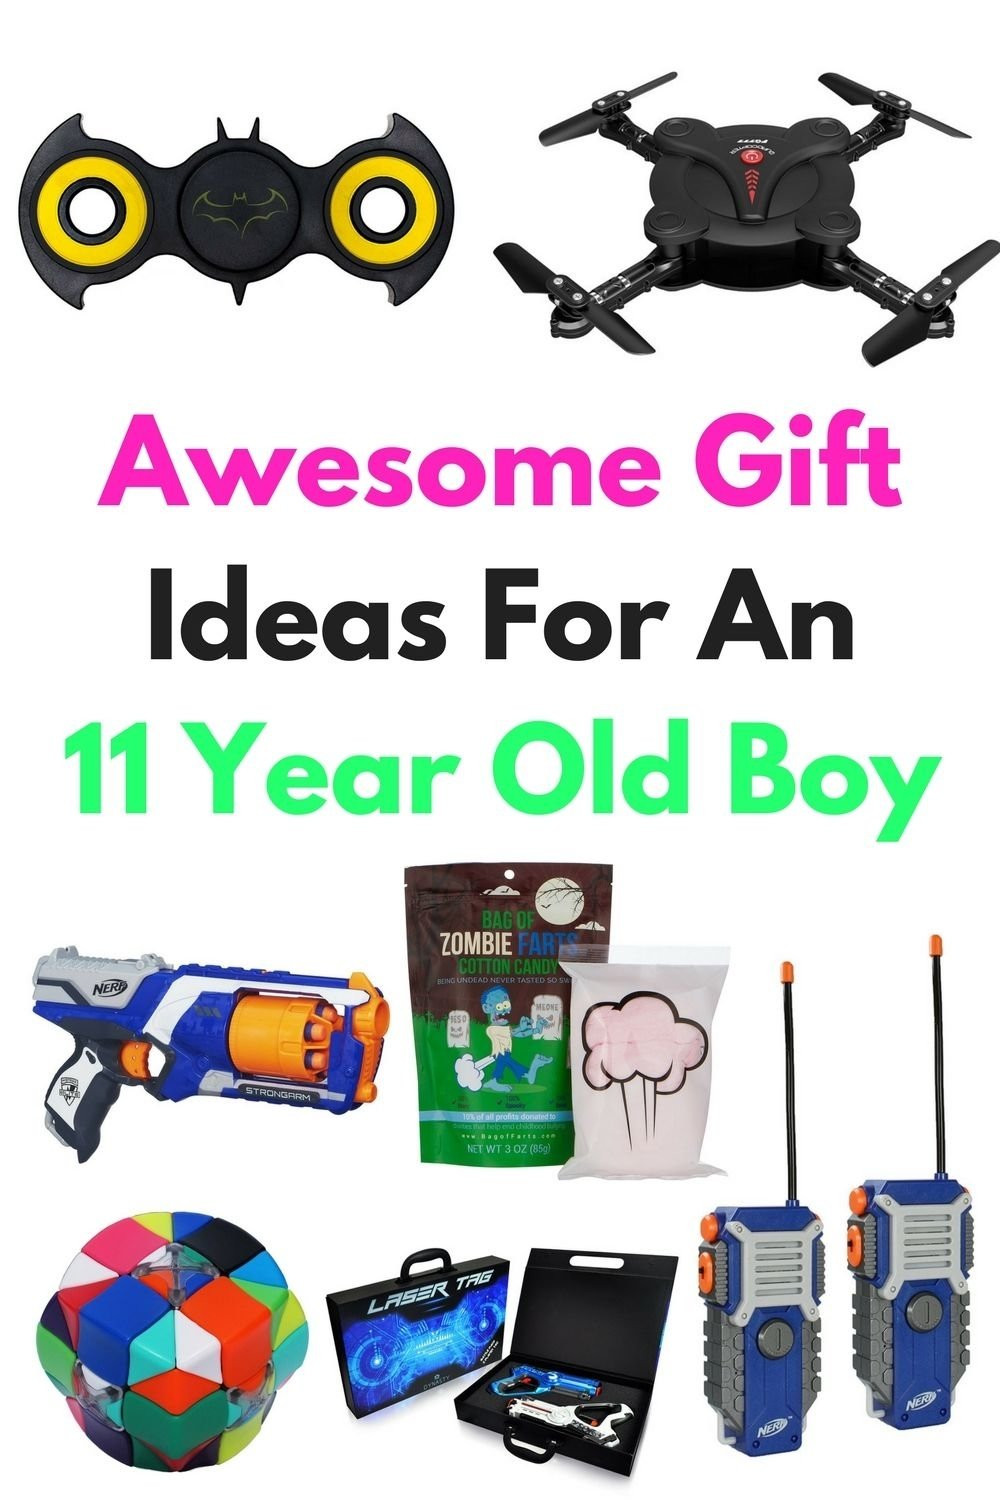 Xmas Gift Ideas For Boys
 10 Attractive 12 Year Old Boy Christmas Gift Ideas 2020